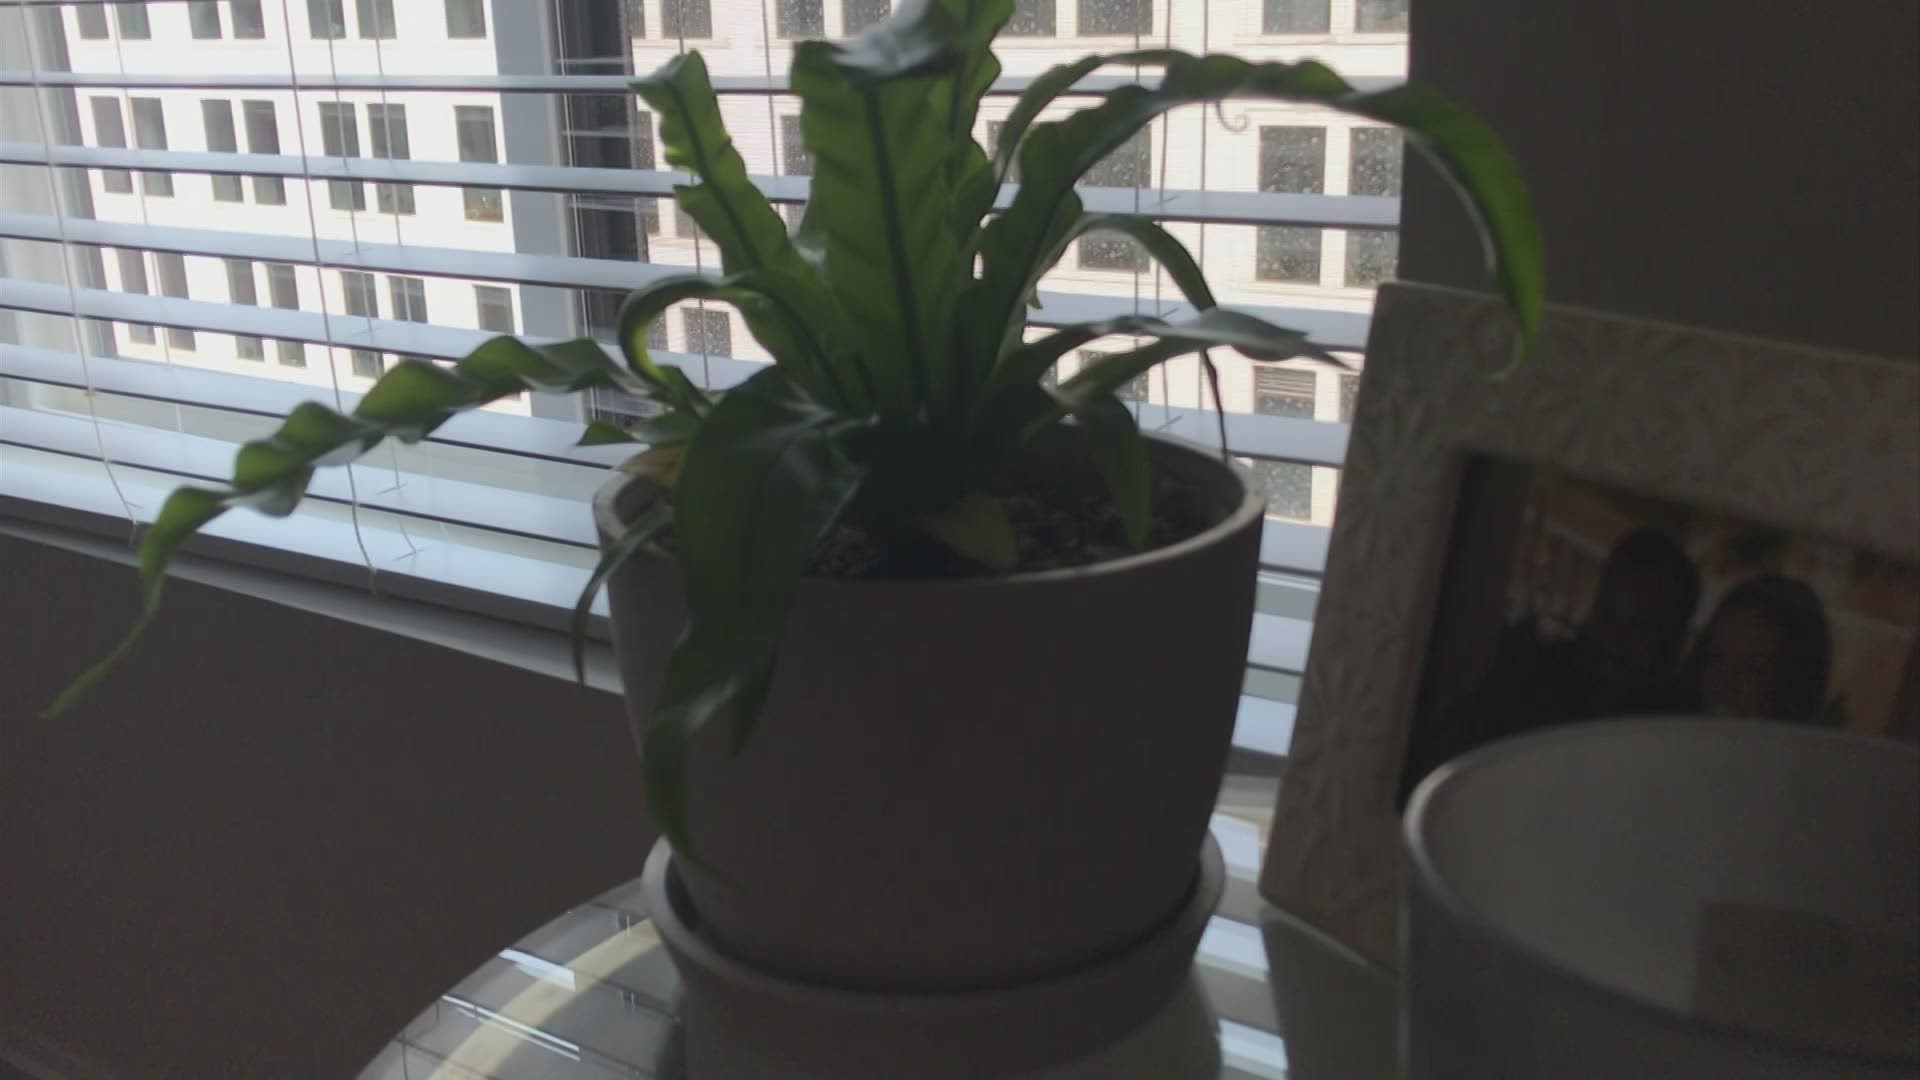 10TV has some tips on how to keep your house plants thriving as the weather changes.